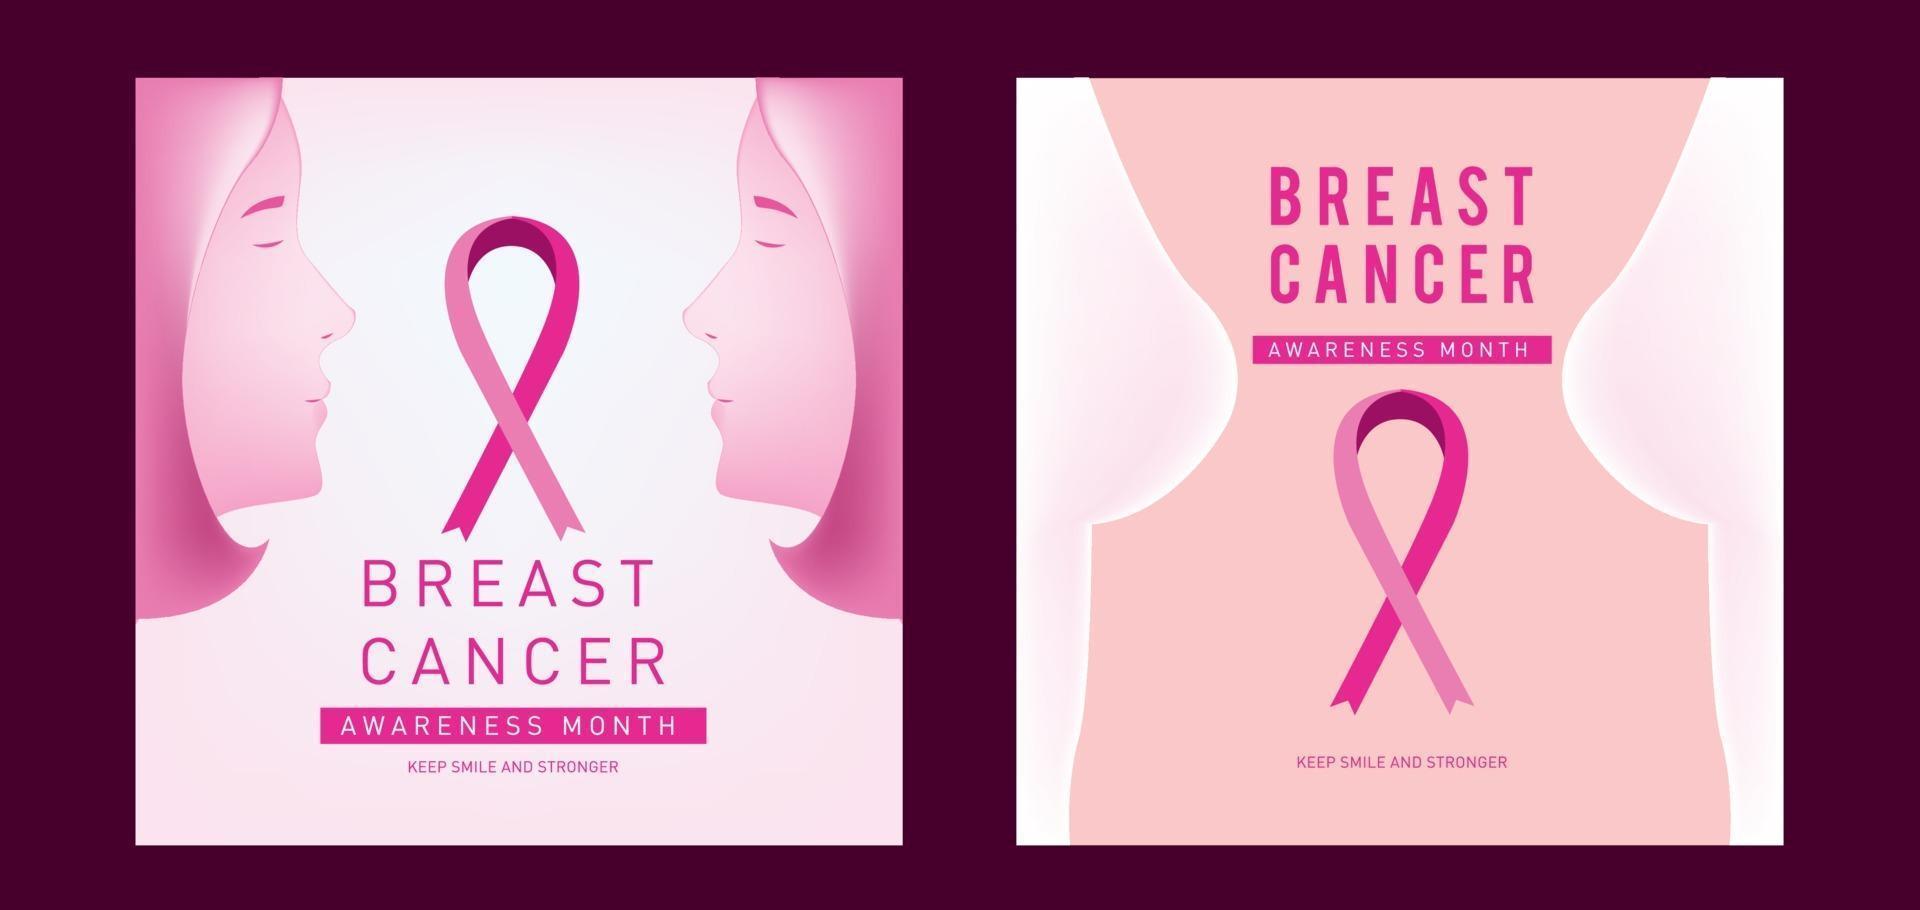 Breast cancer awareness month campaign vector